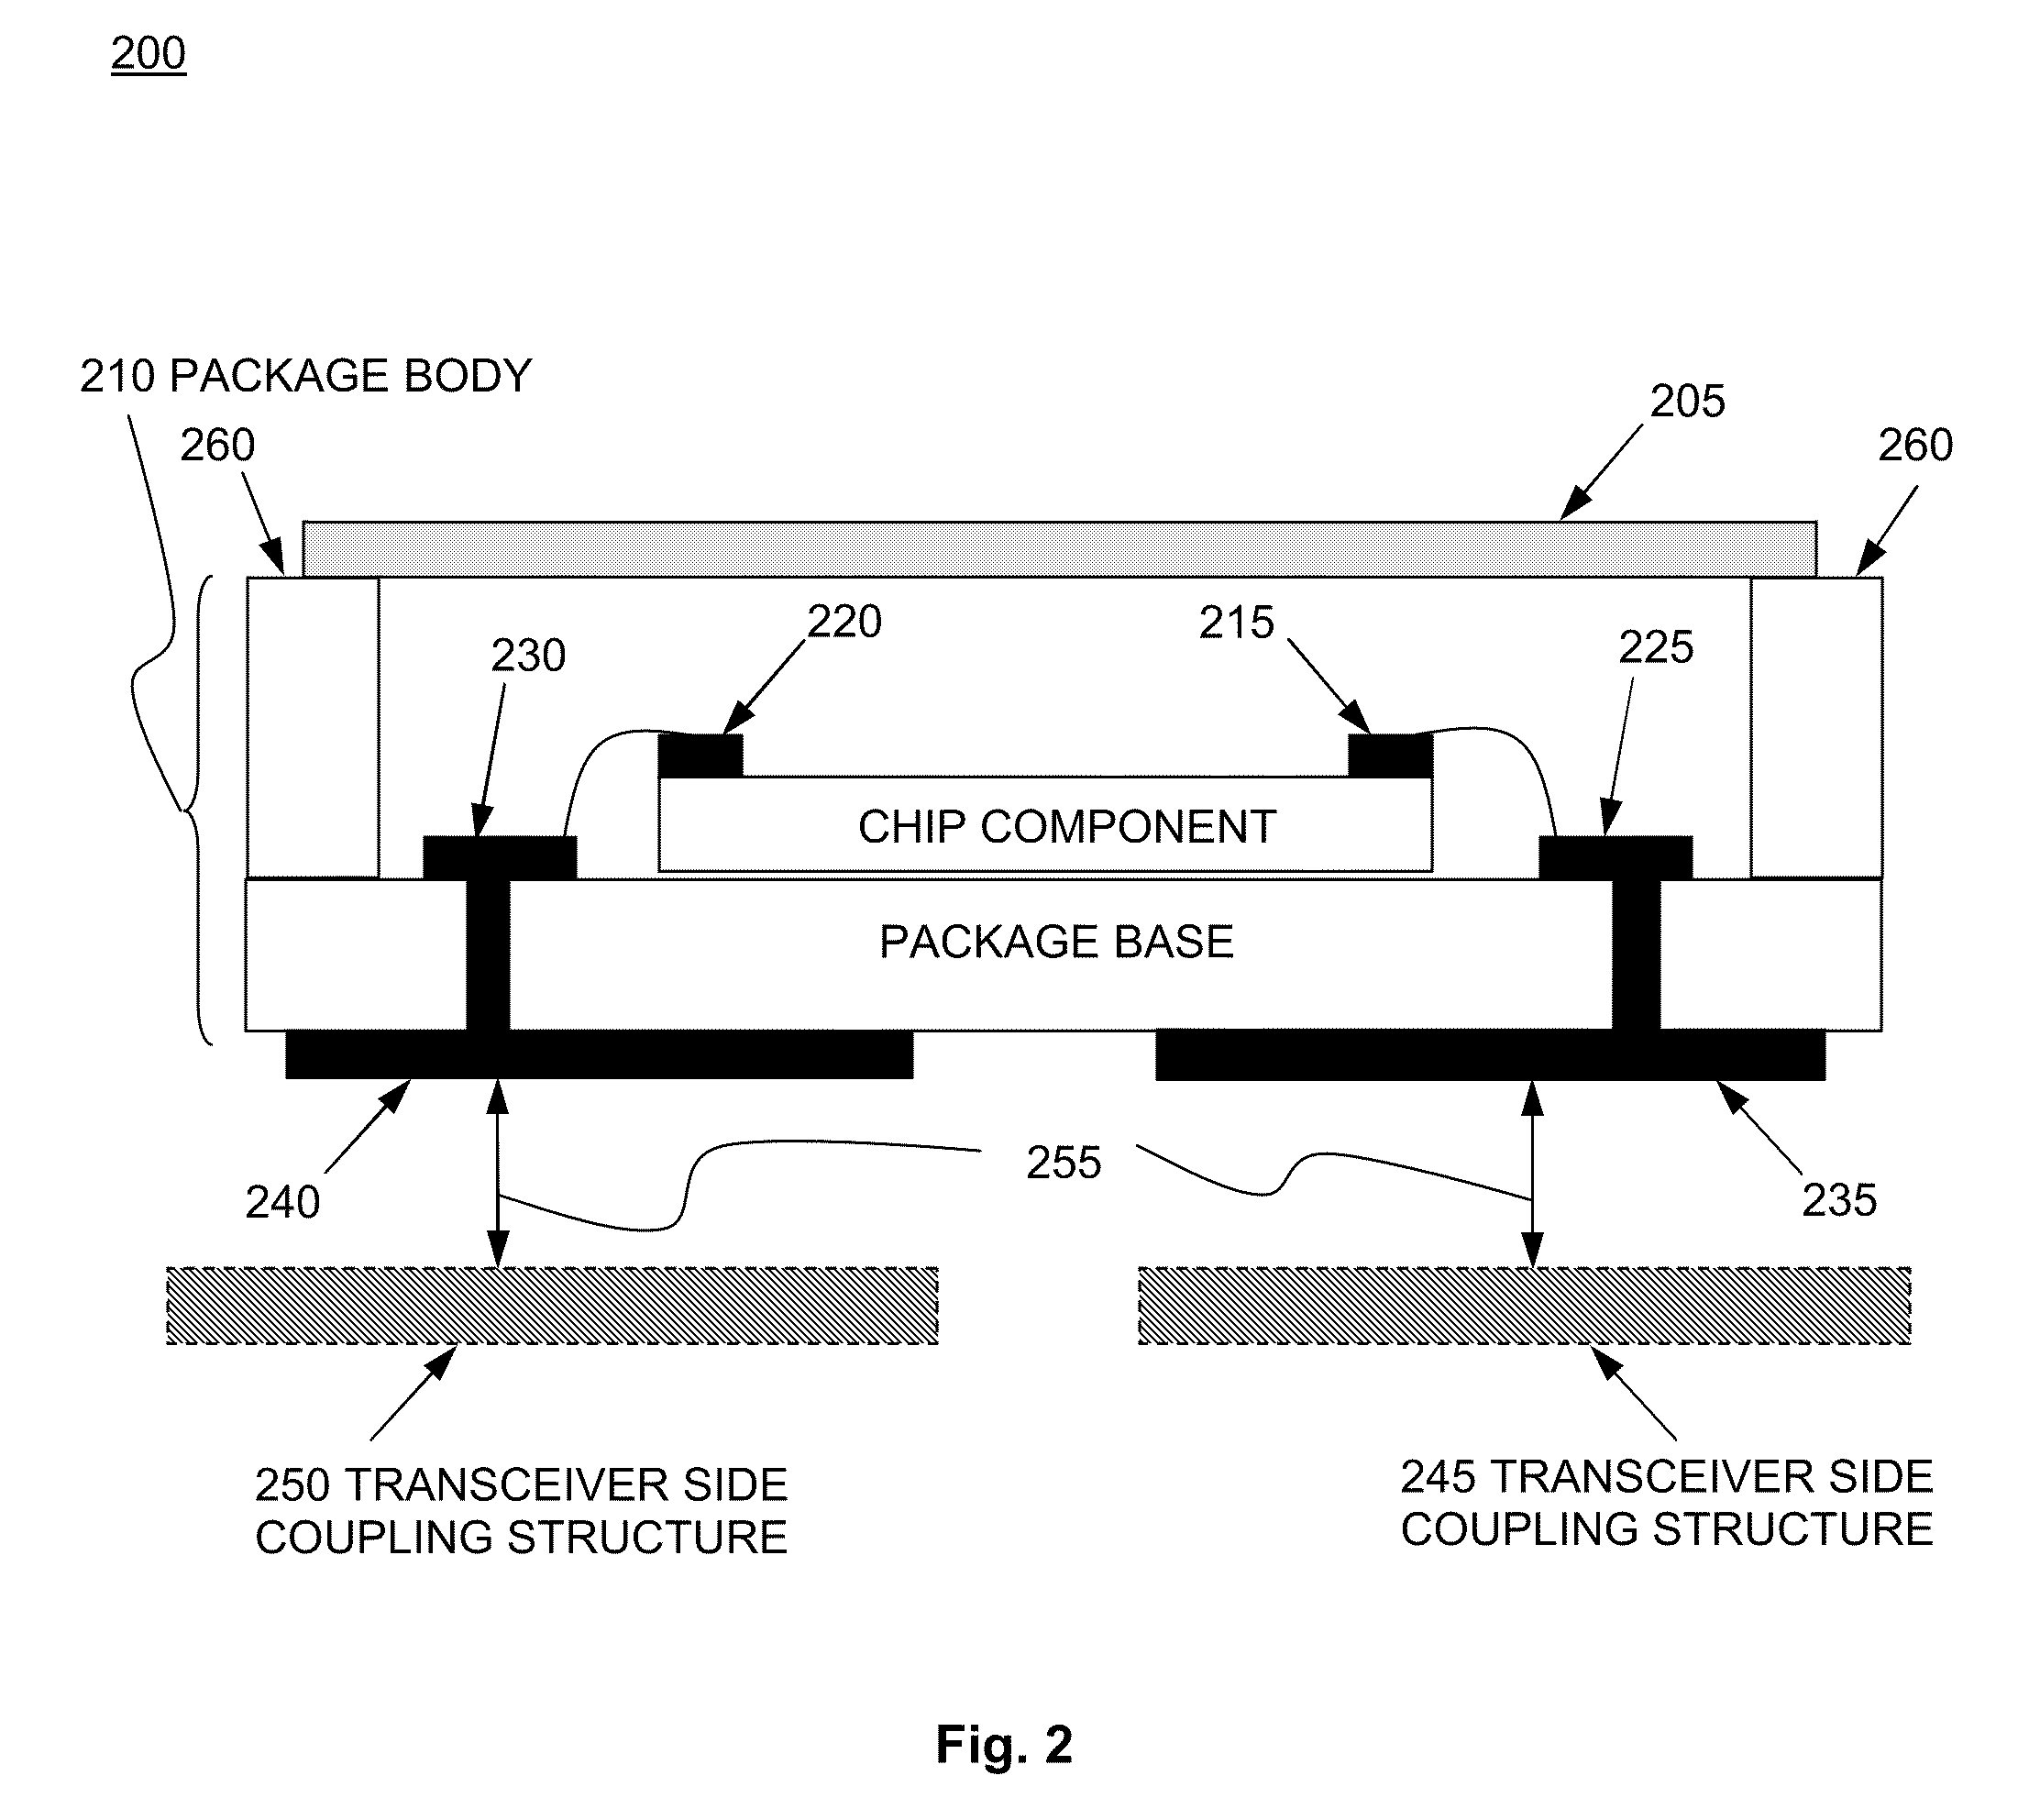 Integrated coupling structures